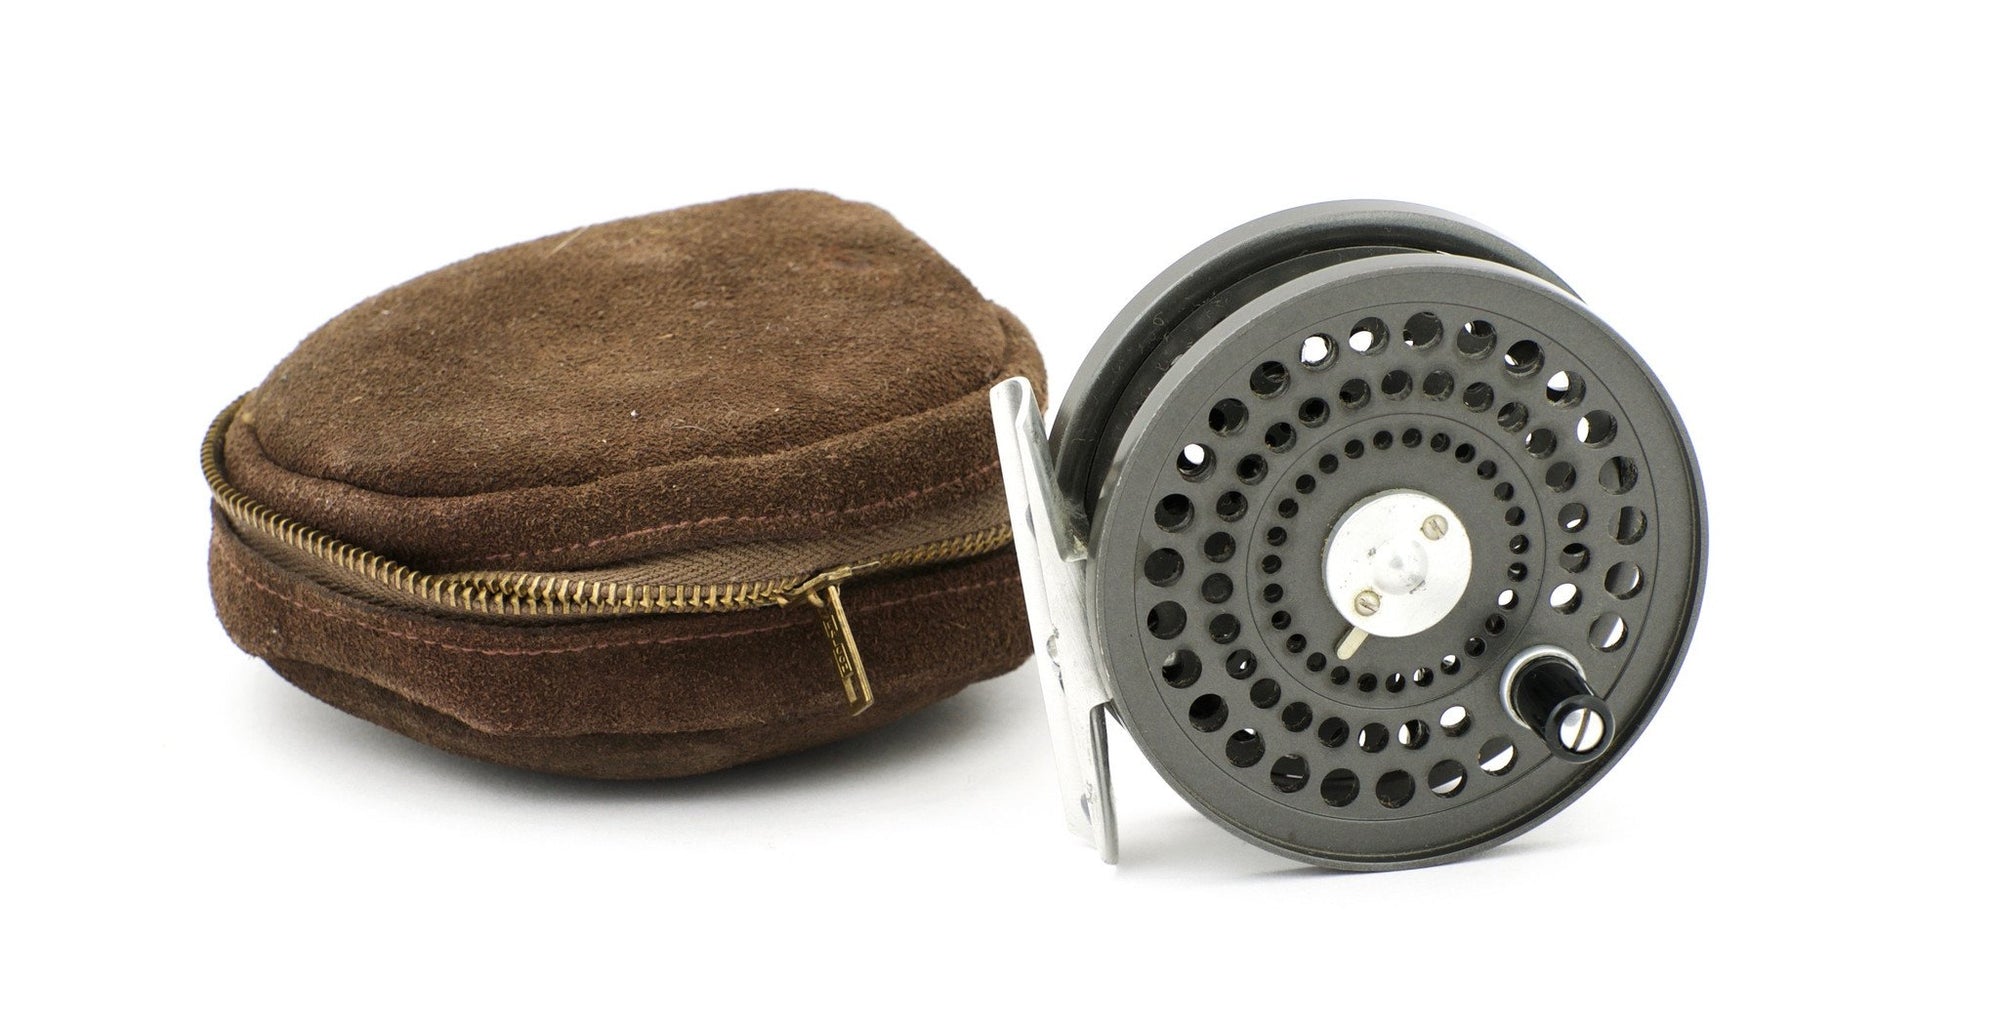 Orvis Classic Reels Page 5 - Spinoza Rod Company